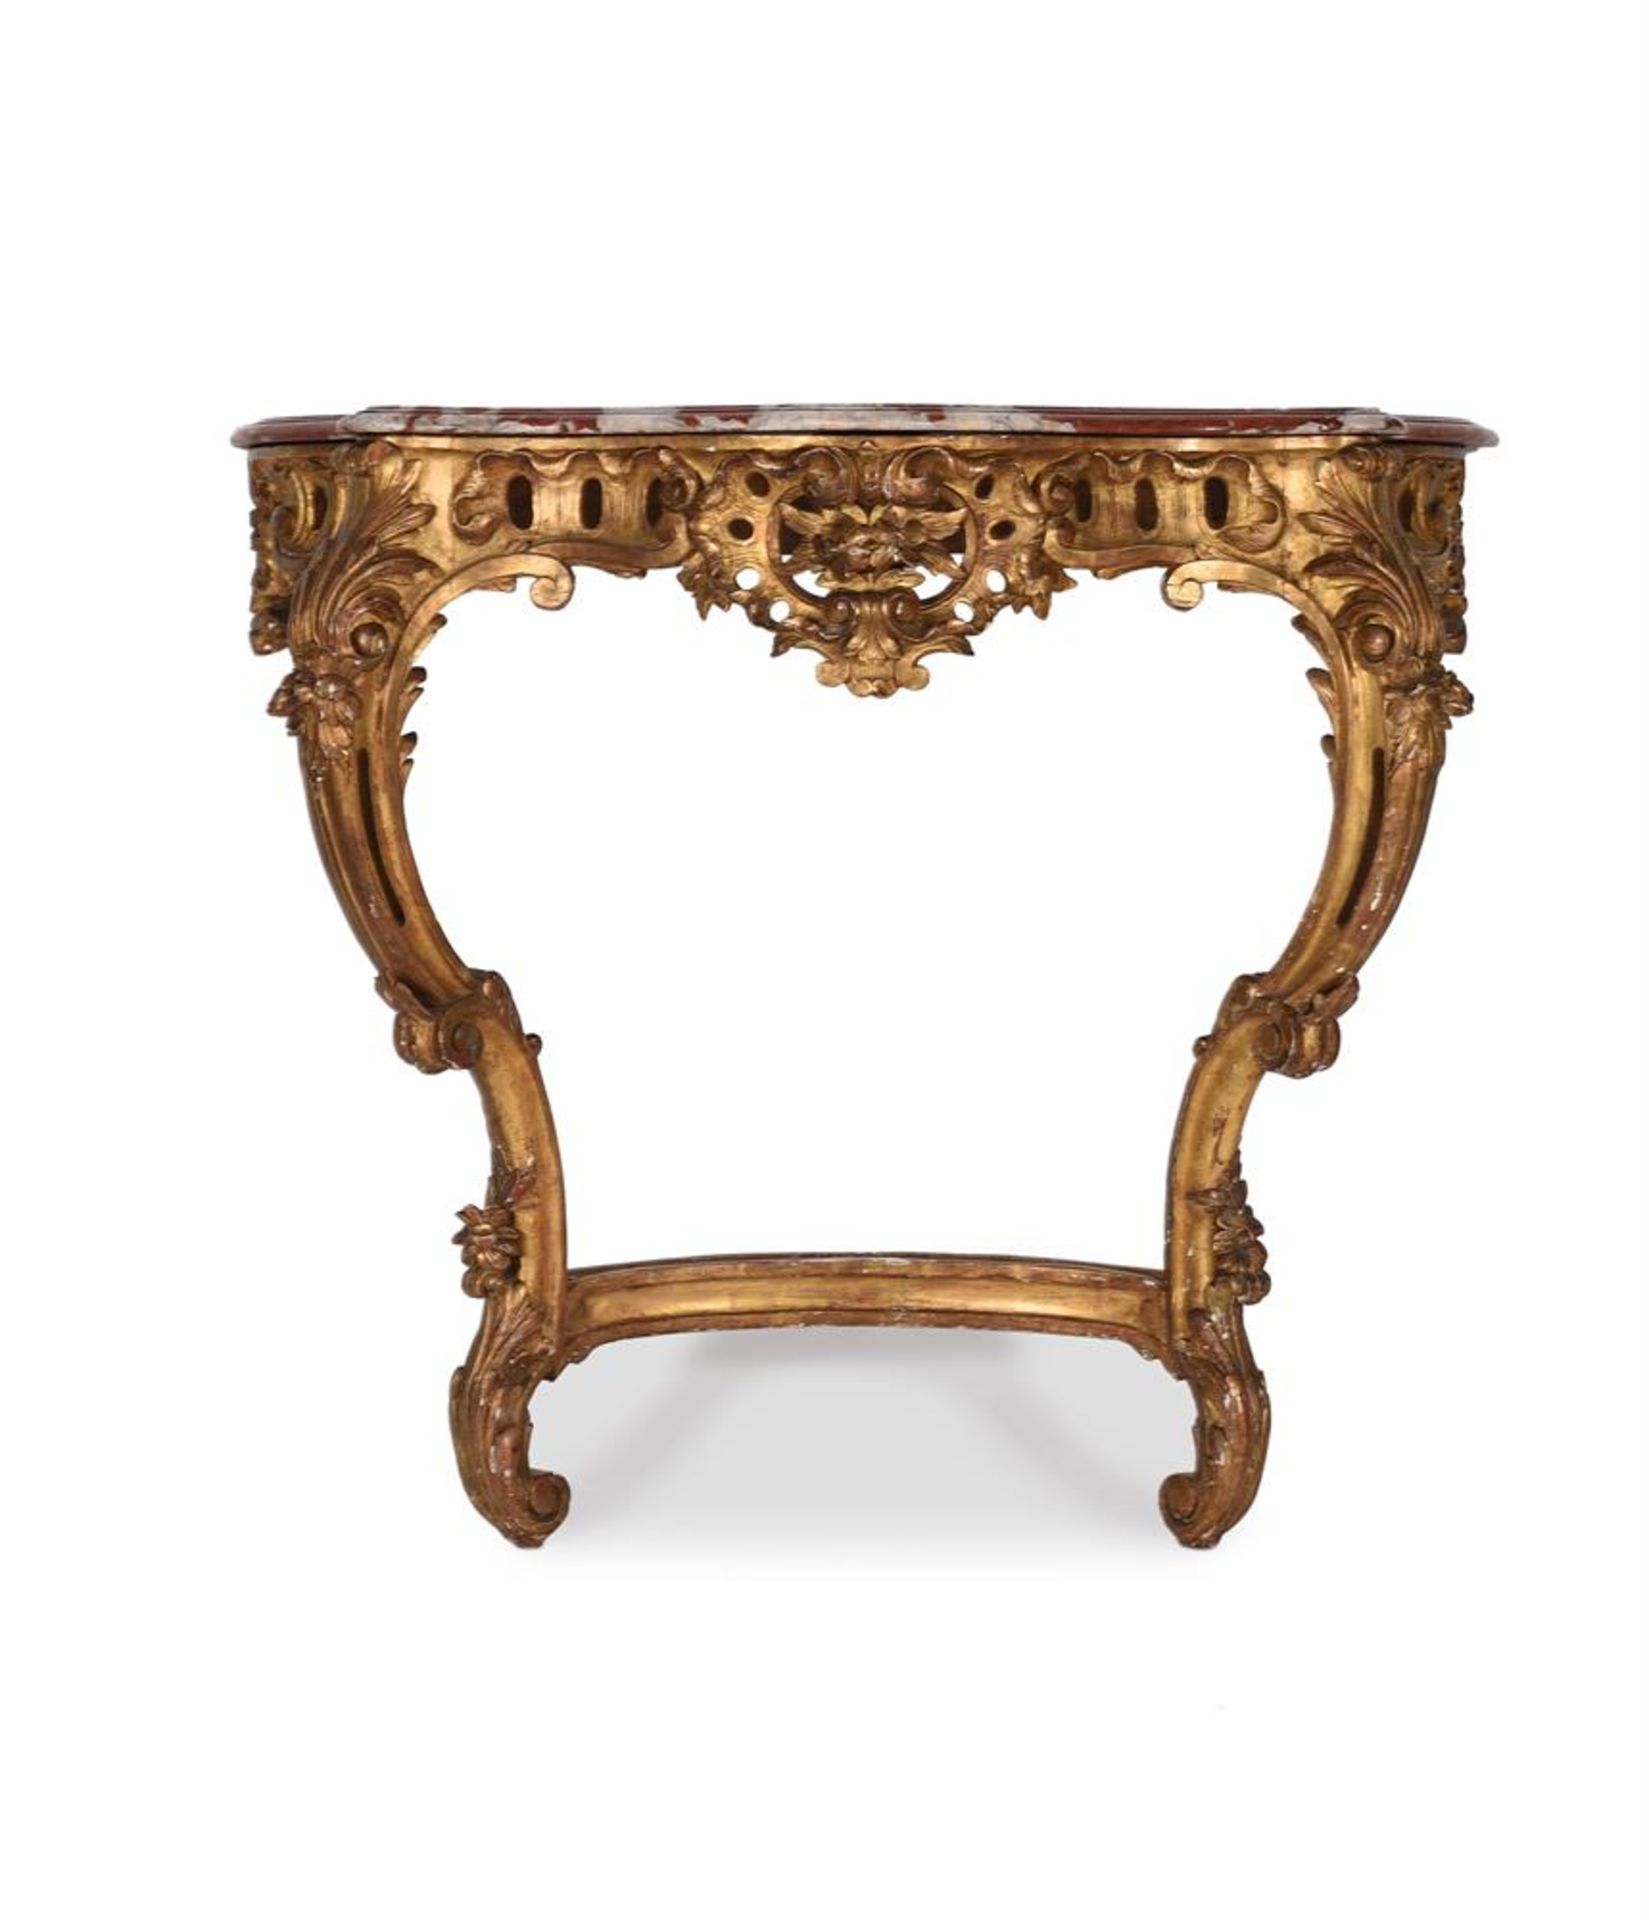 A FRENCH CARVED GILTWOOD CONSOLE TABLE, IN LOUIS XV STYLE, MID 19TH CENTURY